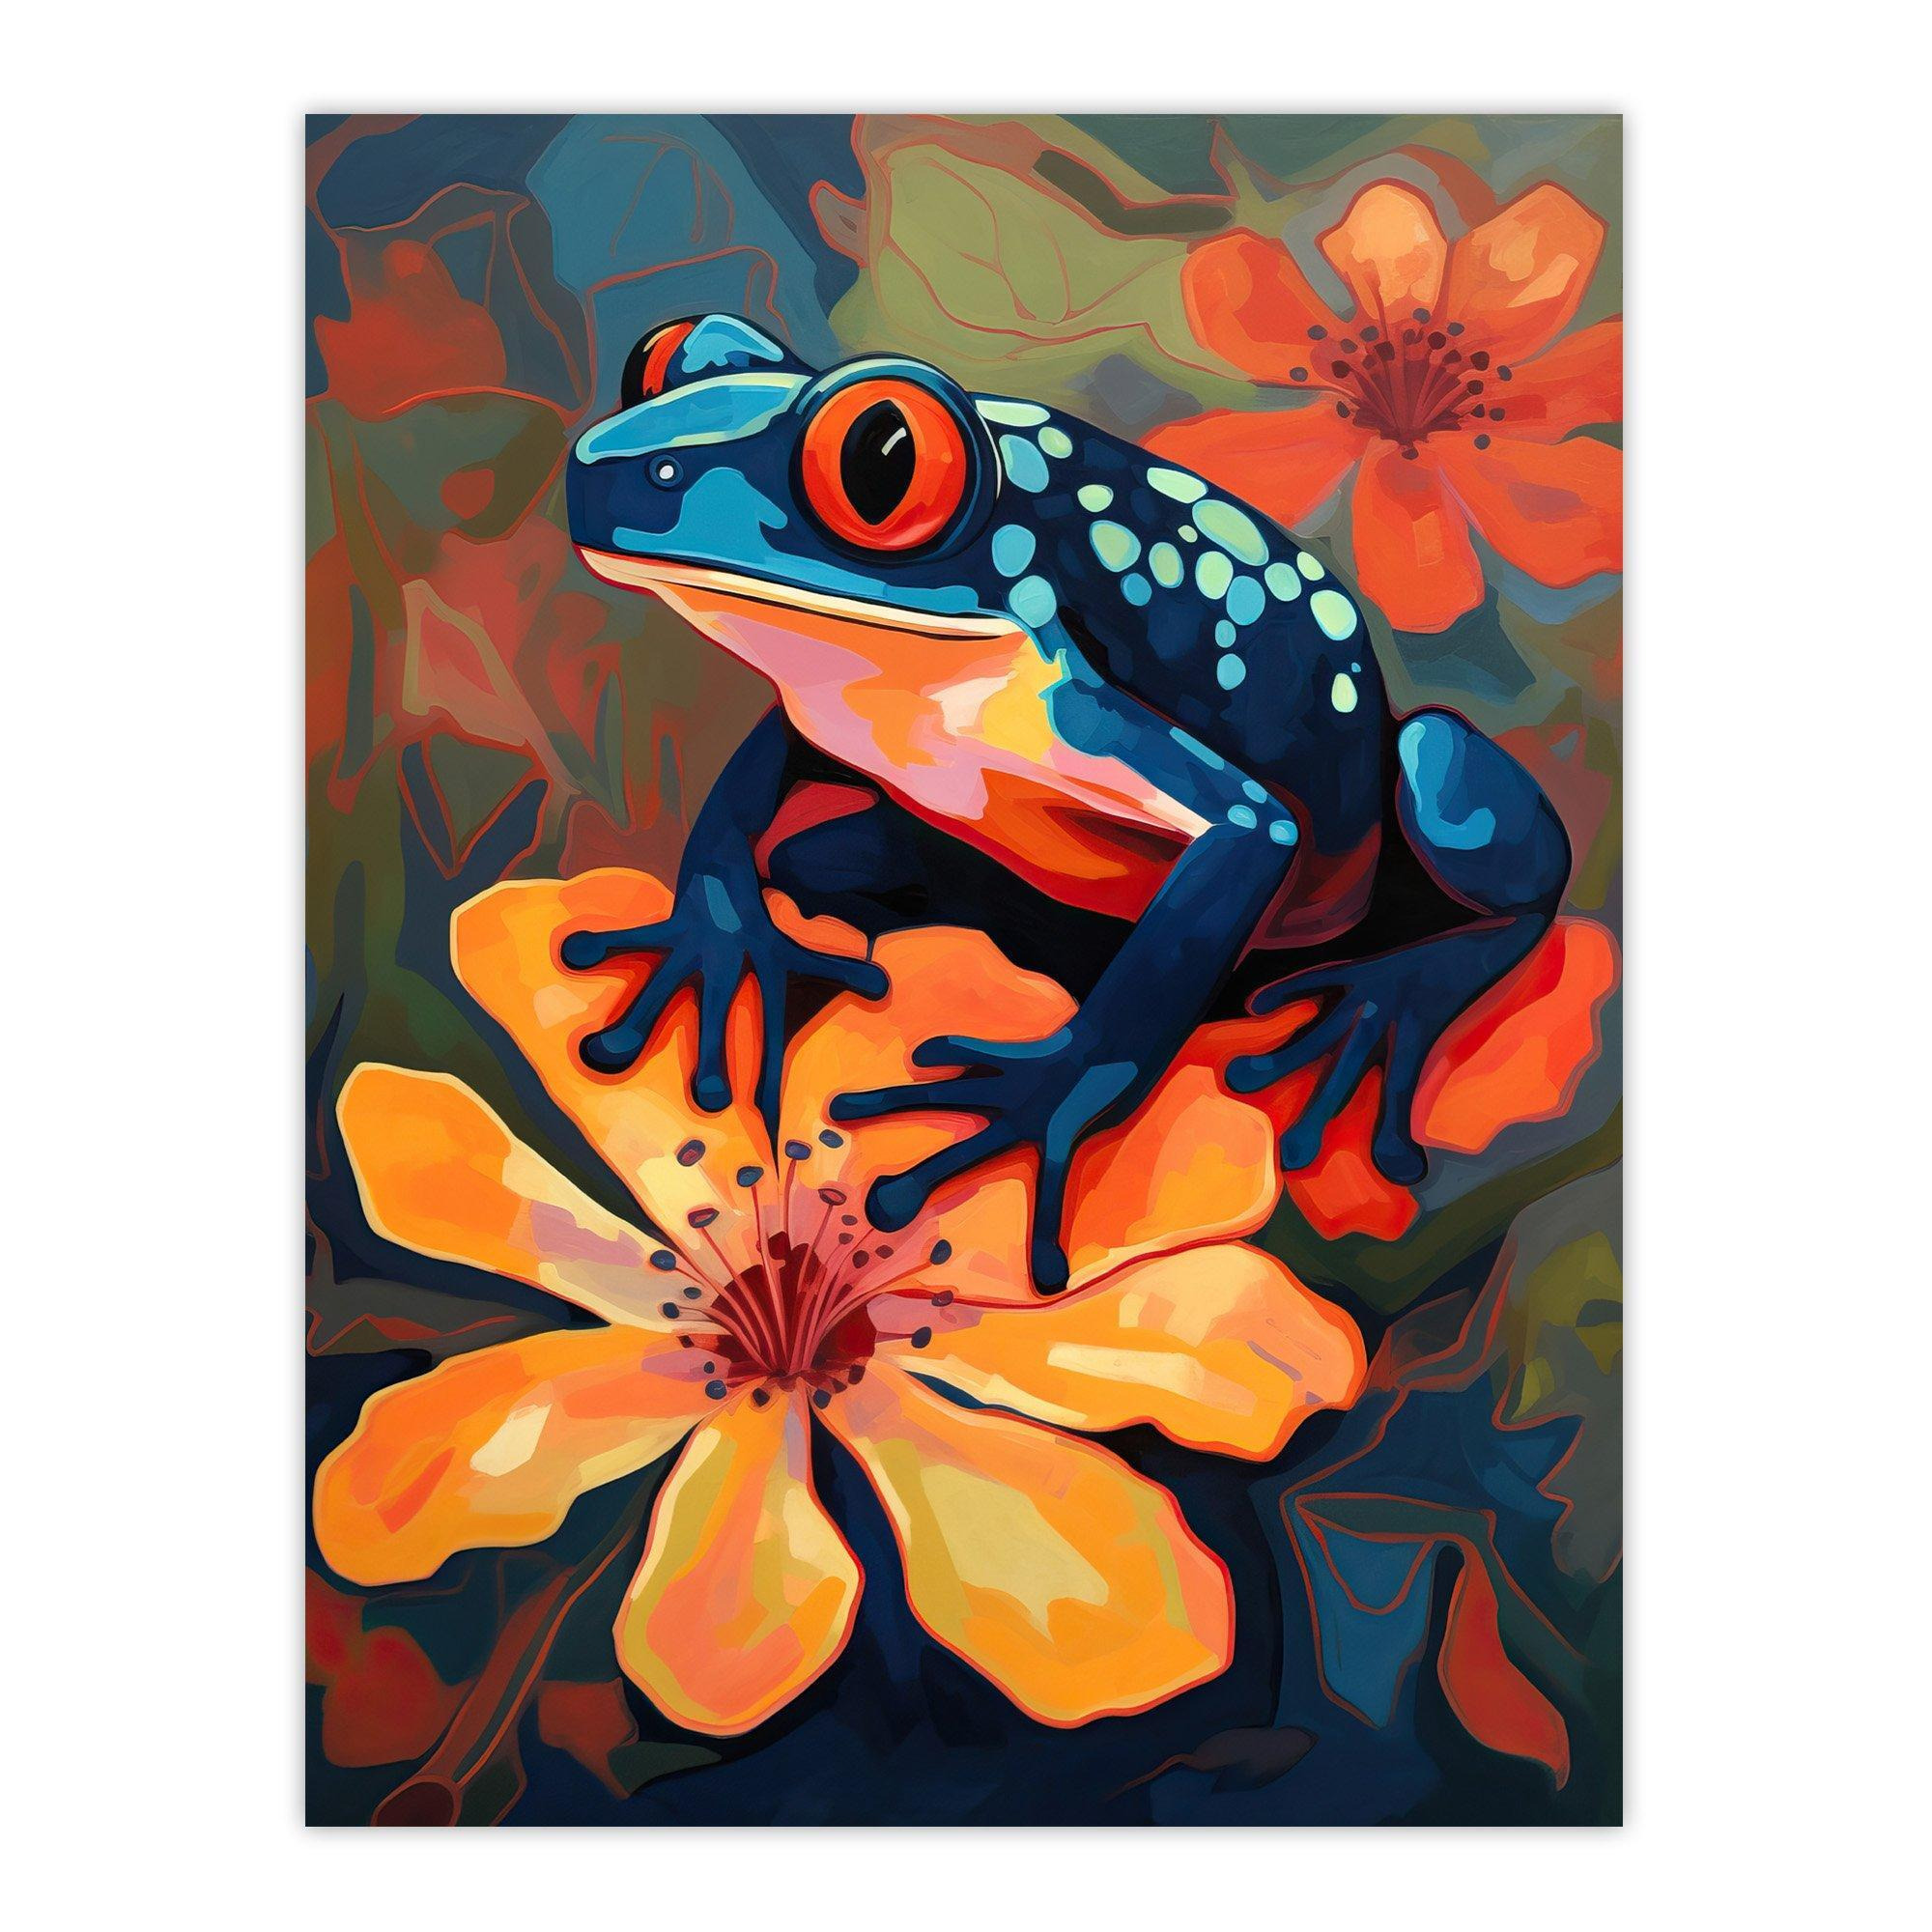 Tropical Blue Frog On Orange Flower Striking Oil Painting Amazon Jungle Large Wall Art Poster Print Thick Paper 18X24 Inch - image 1